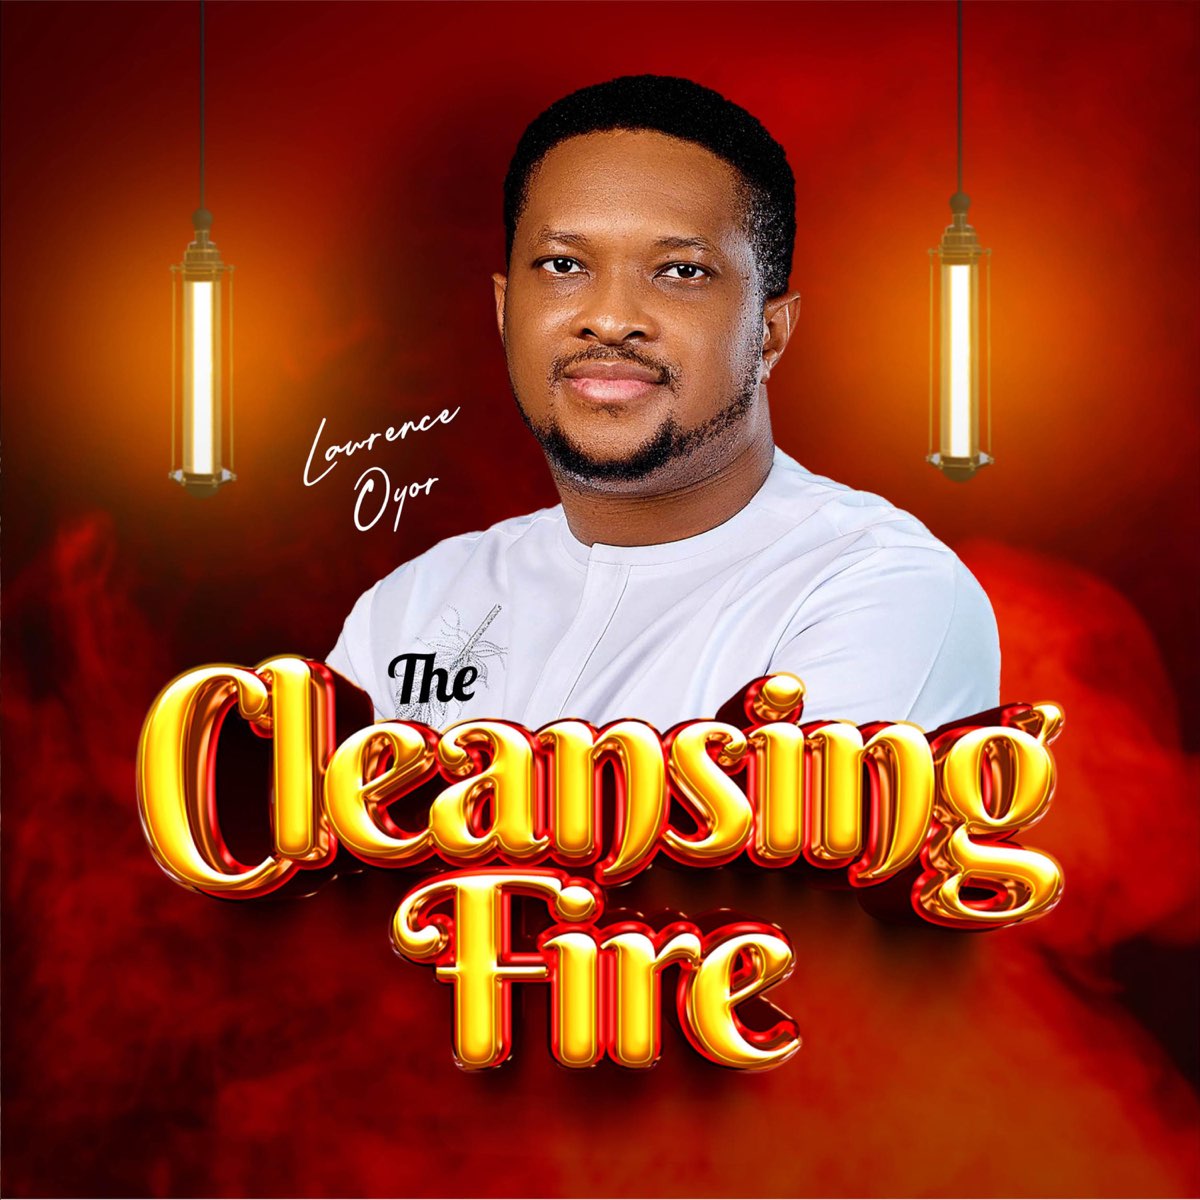 Lawrence Oyor  The Cleansing Fire [Video]